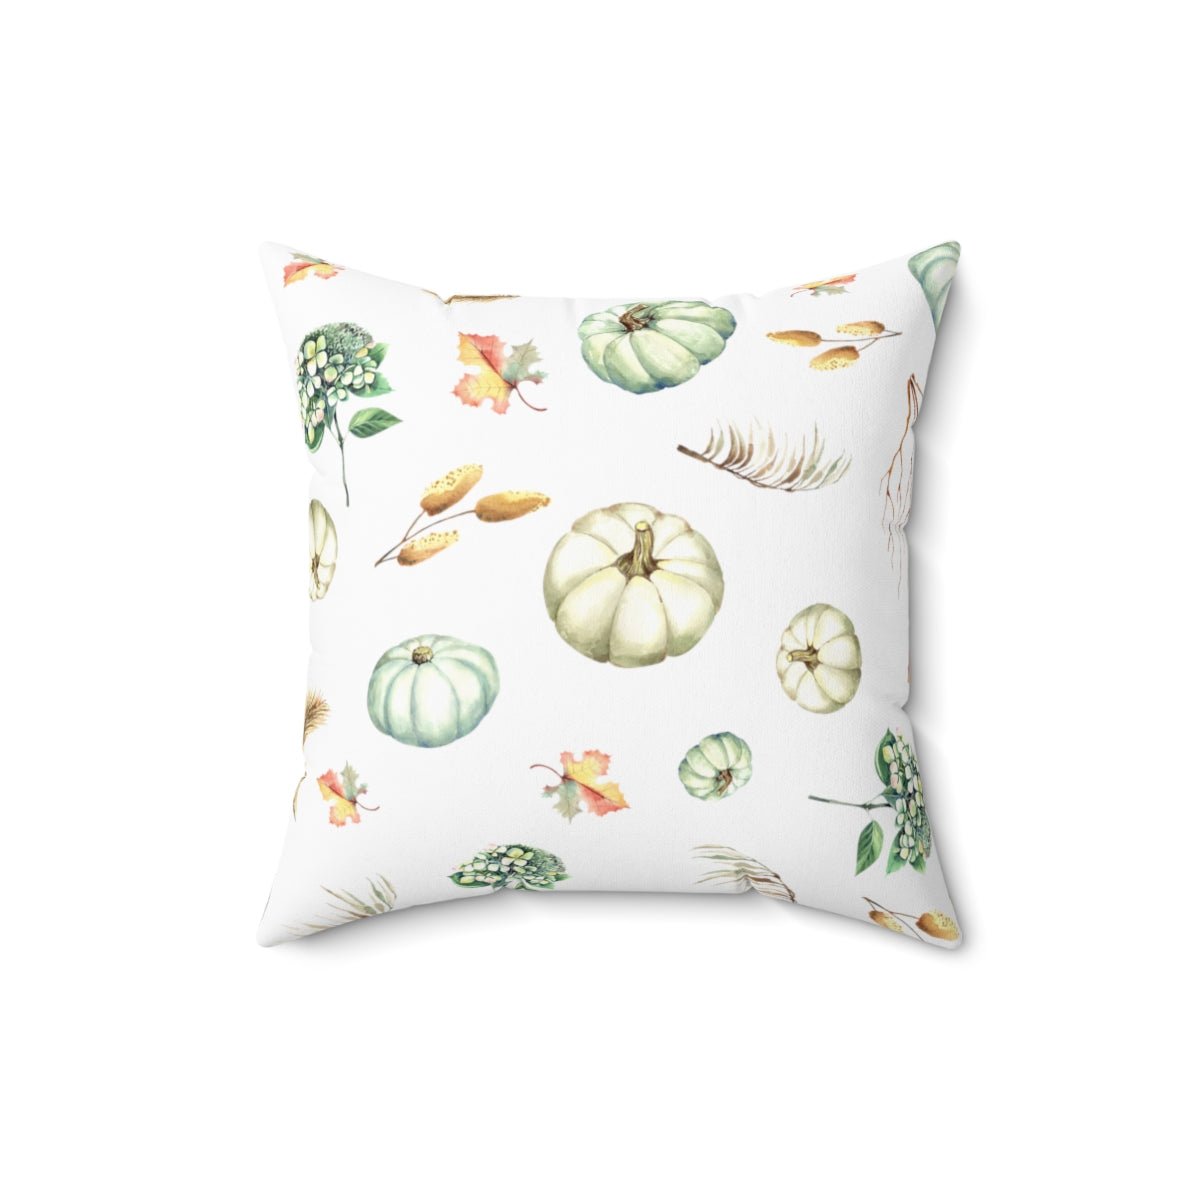 Fall Pumpkins and Leaves Throw Pillow - Puffin Lime